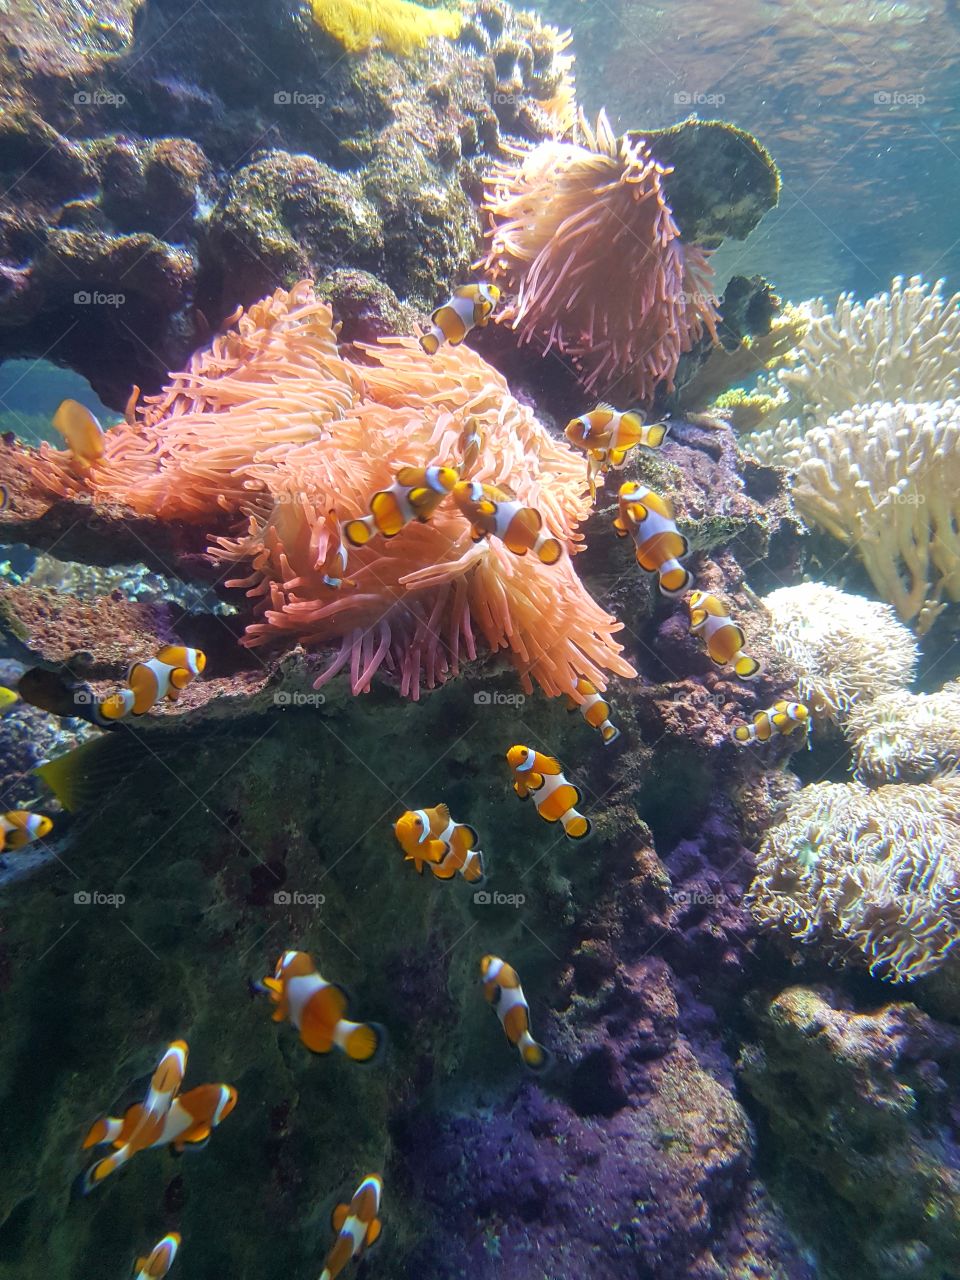 Aquarium view with corals, anemones and clownfishes